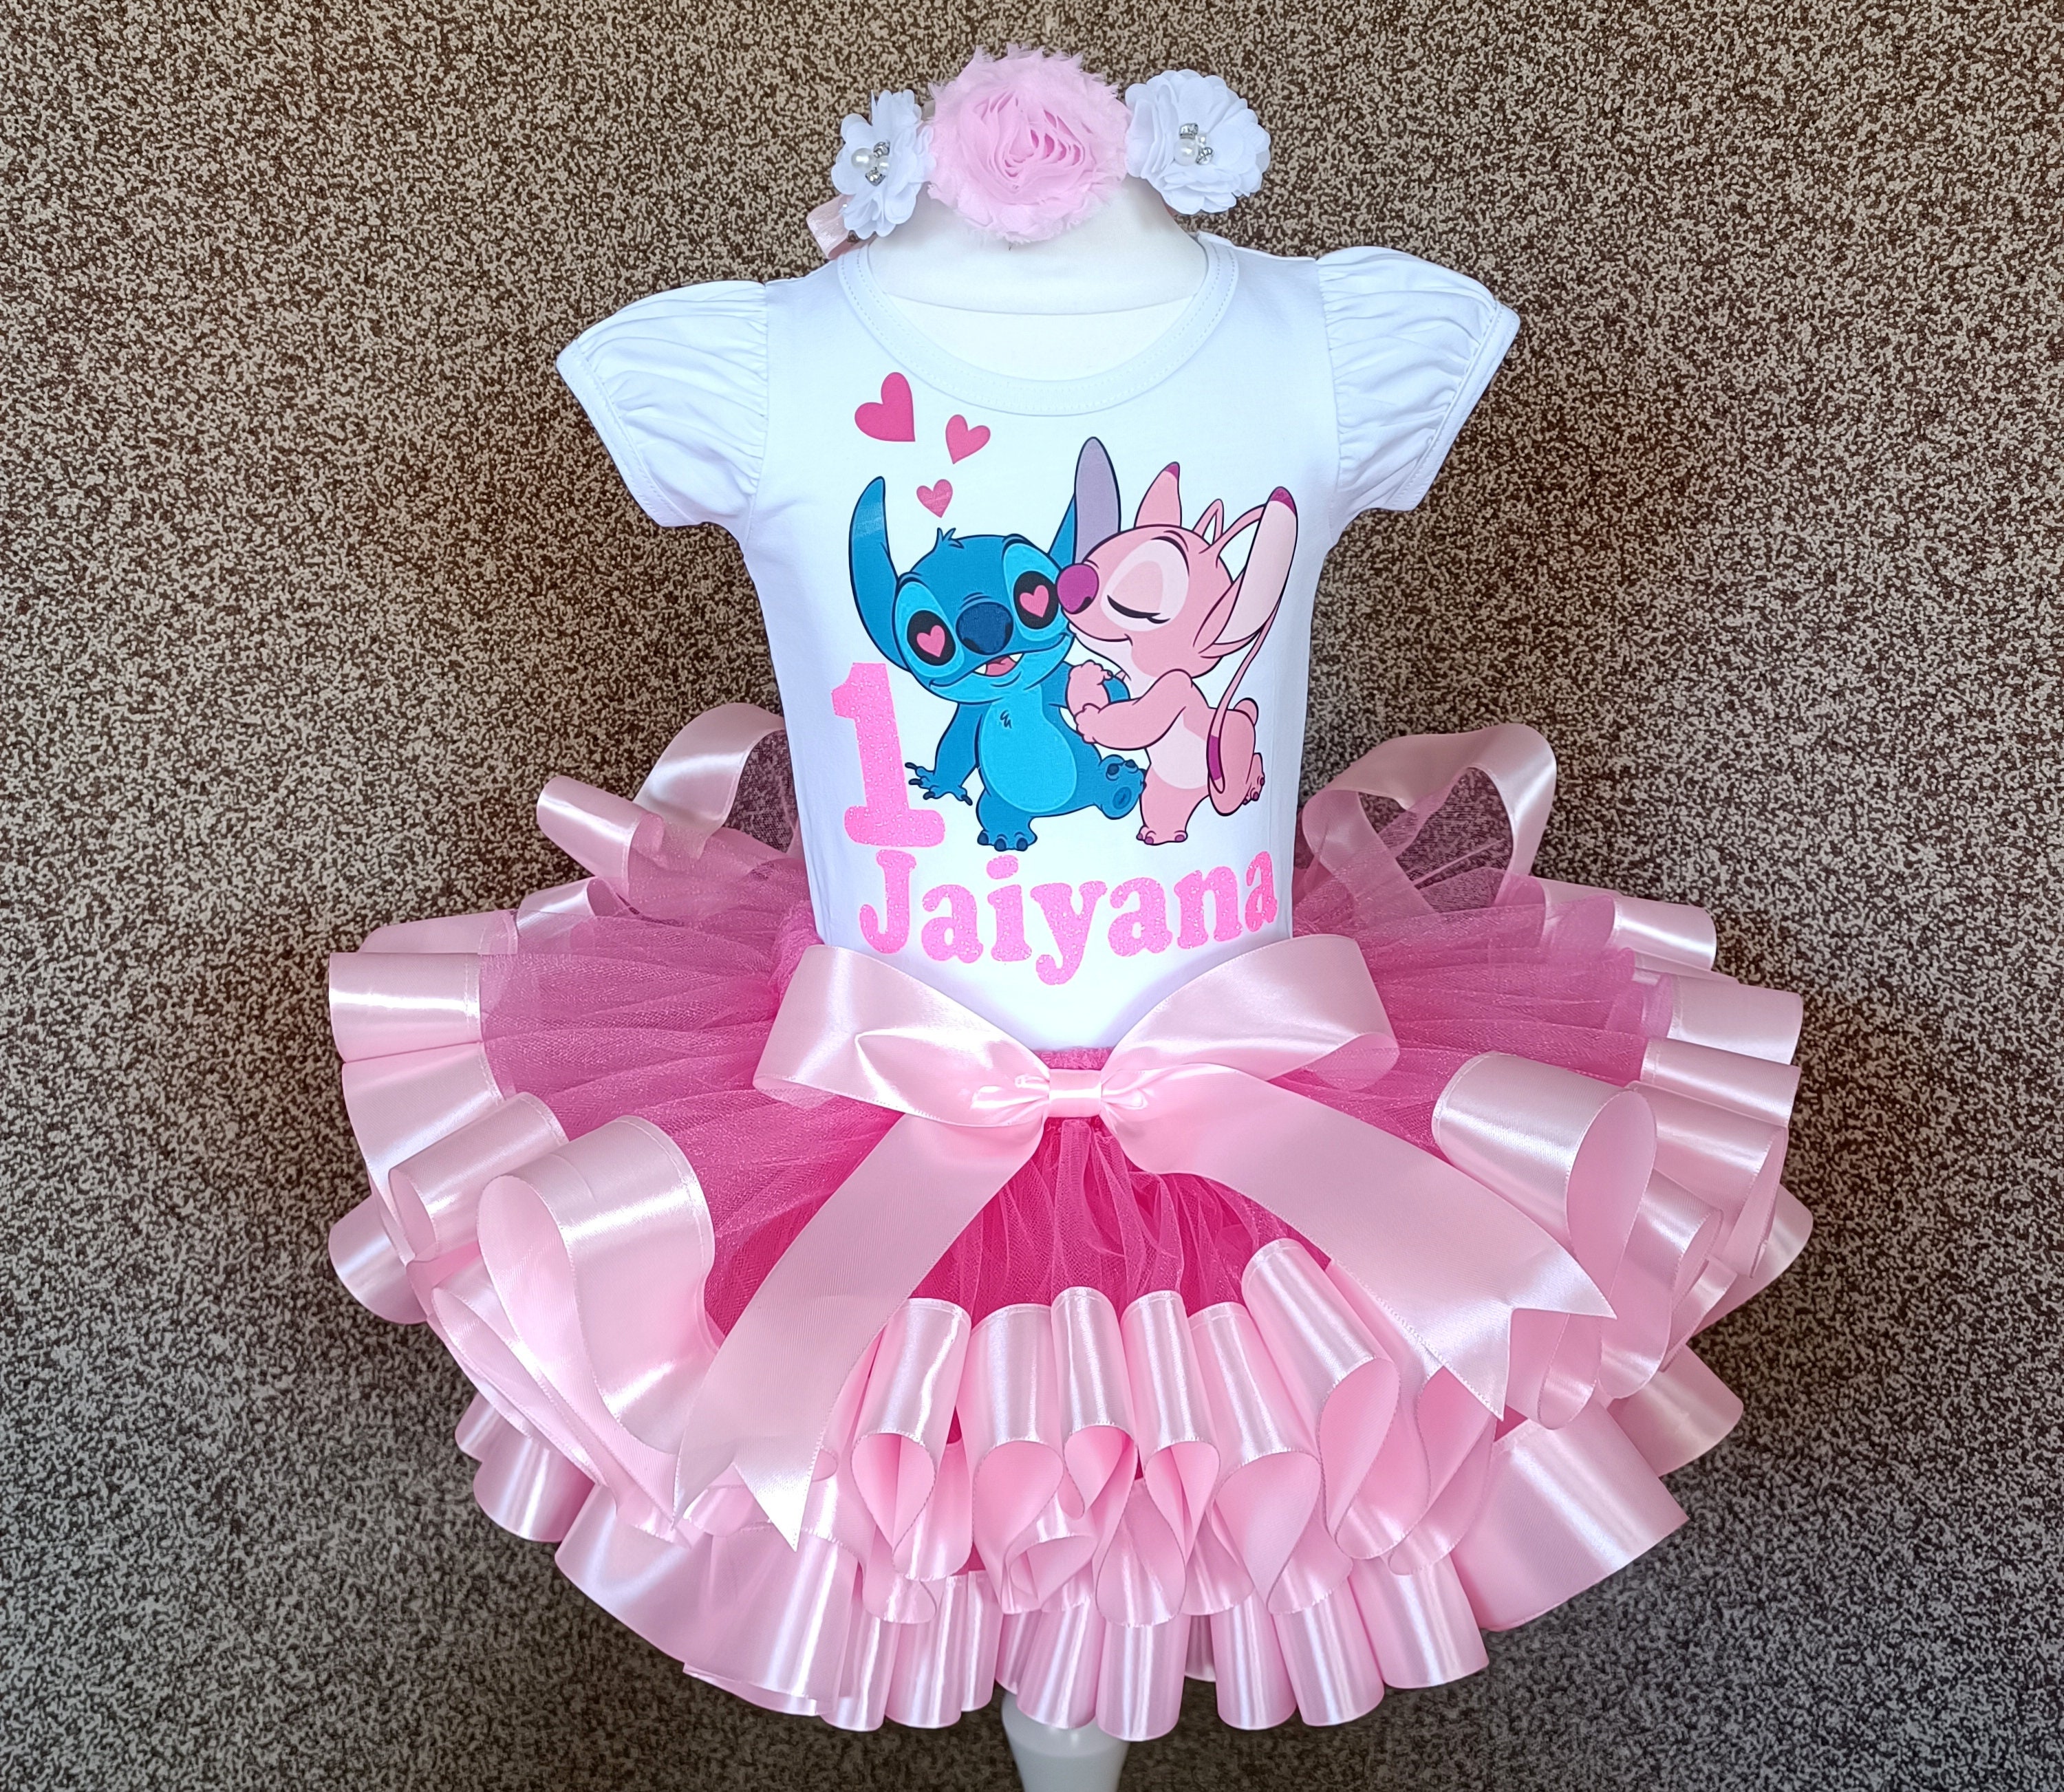 Stitch and Angel Party Tutu Outfit, Stitch Birthday Party Costume